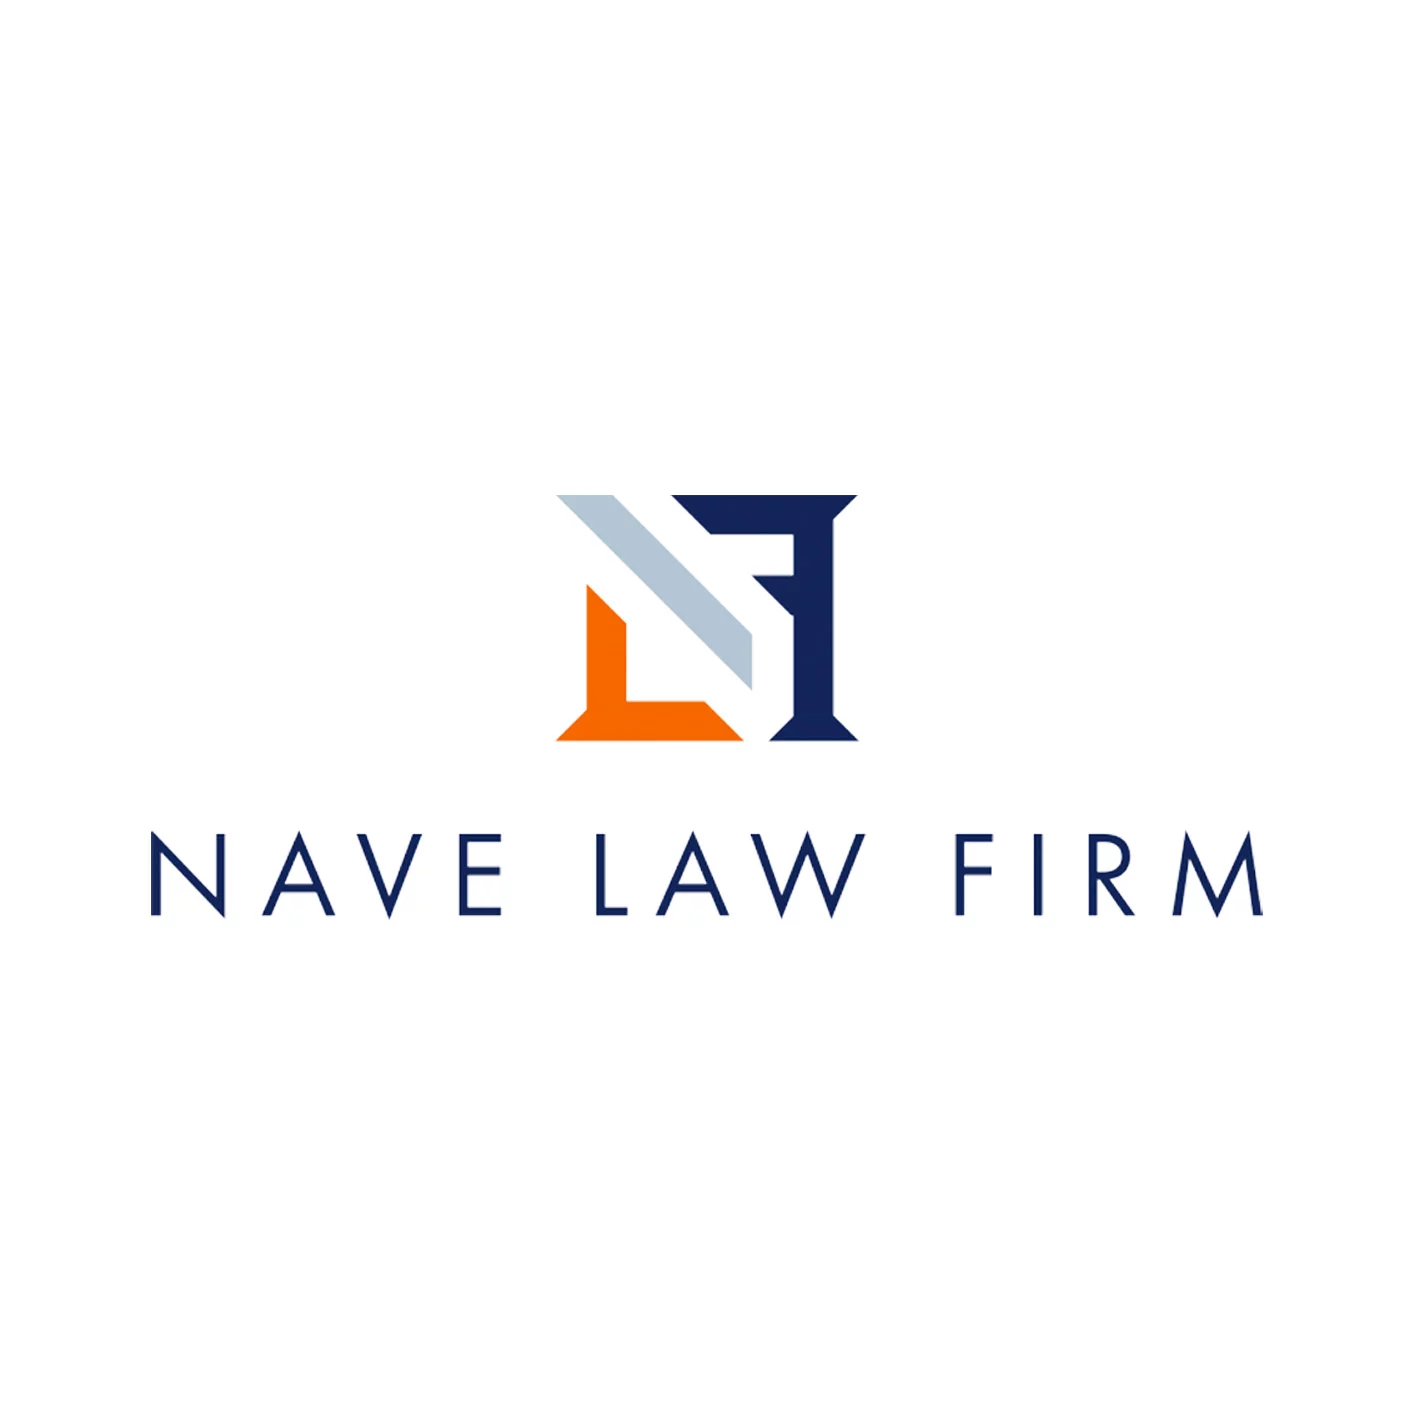 Nave Law Firm Logo